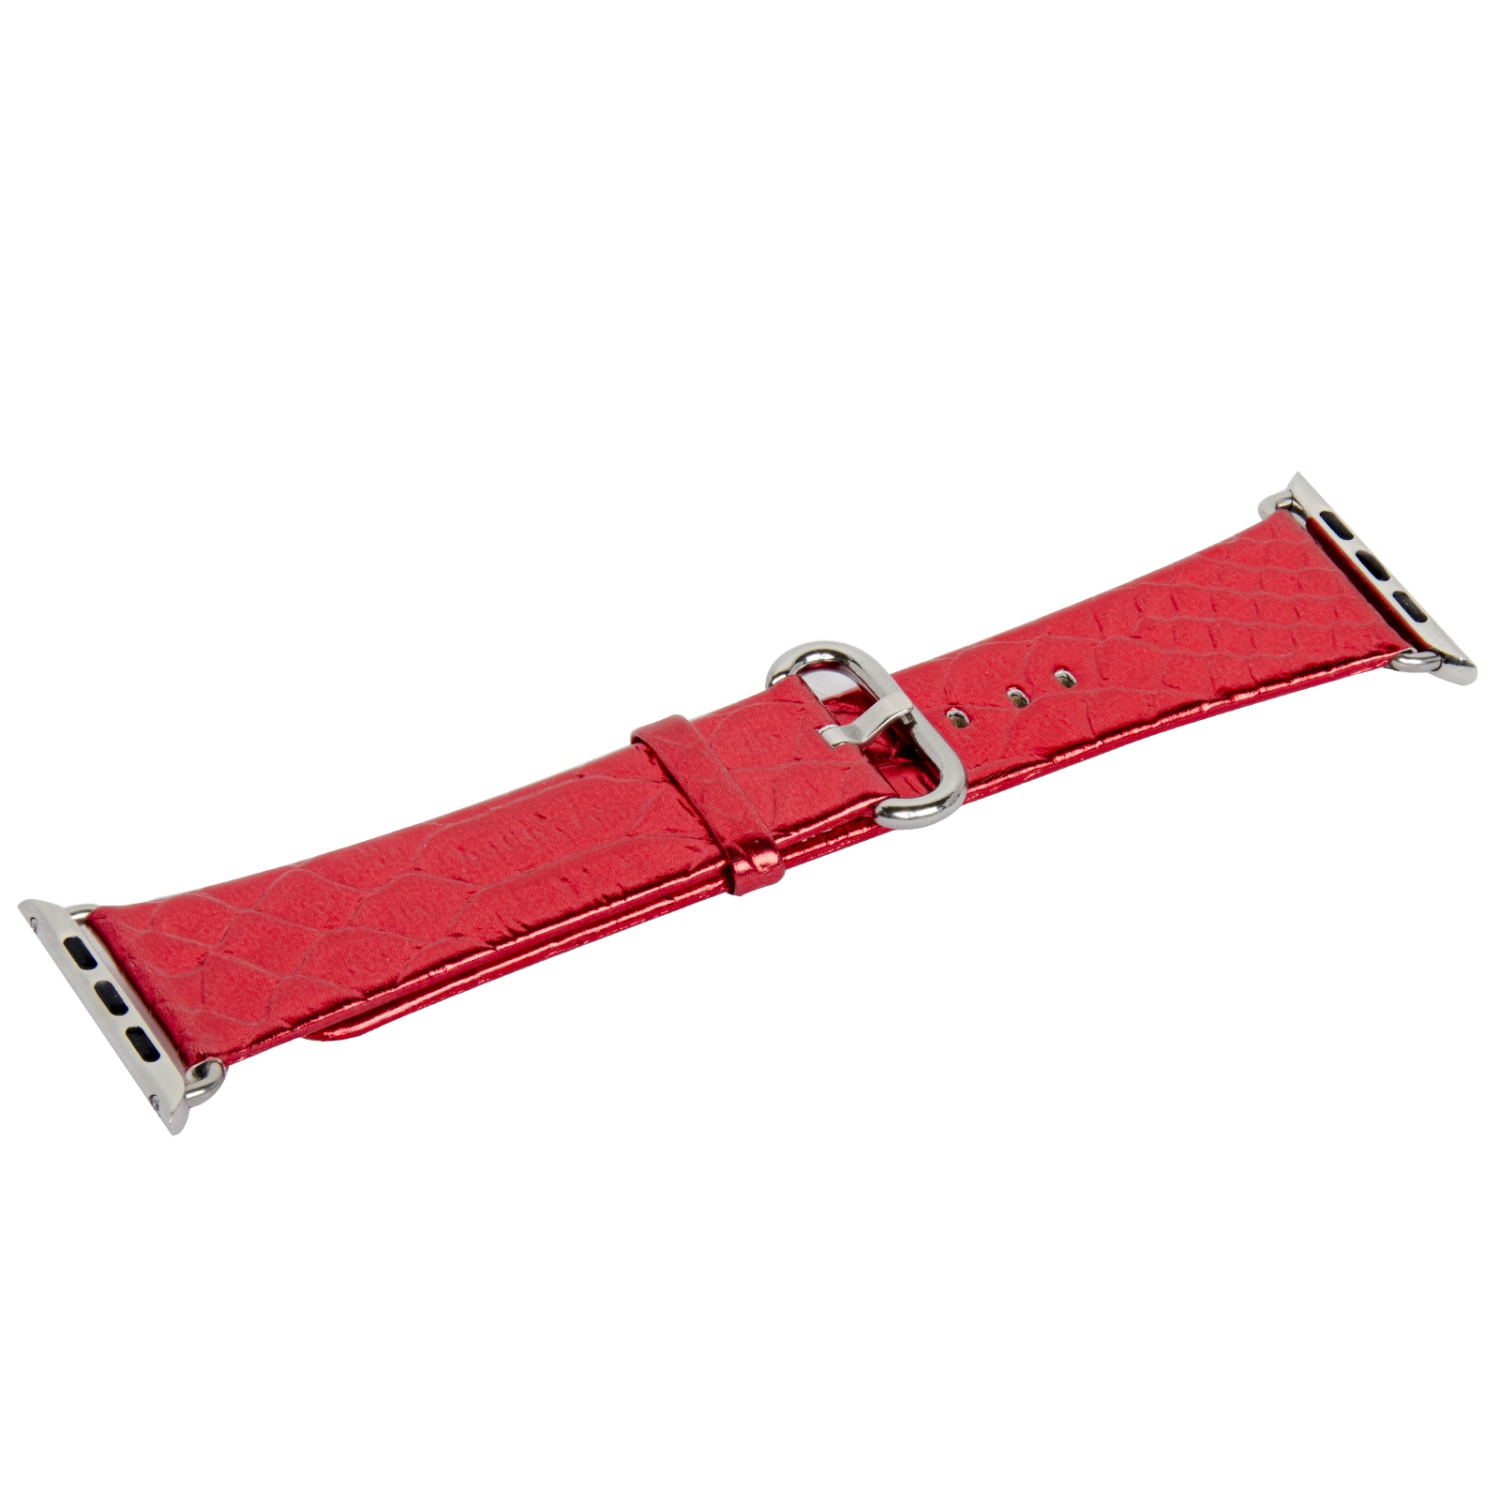 Shiny Leather Skin Replacement Apple Watch Band with Stainless Metal Clasp for iWatch Series 1/2/3/4/5/6/7/8 - 42mm/44mm/45mm - Red